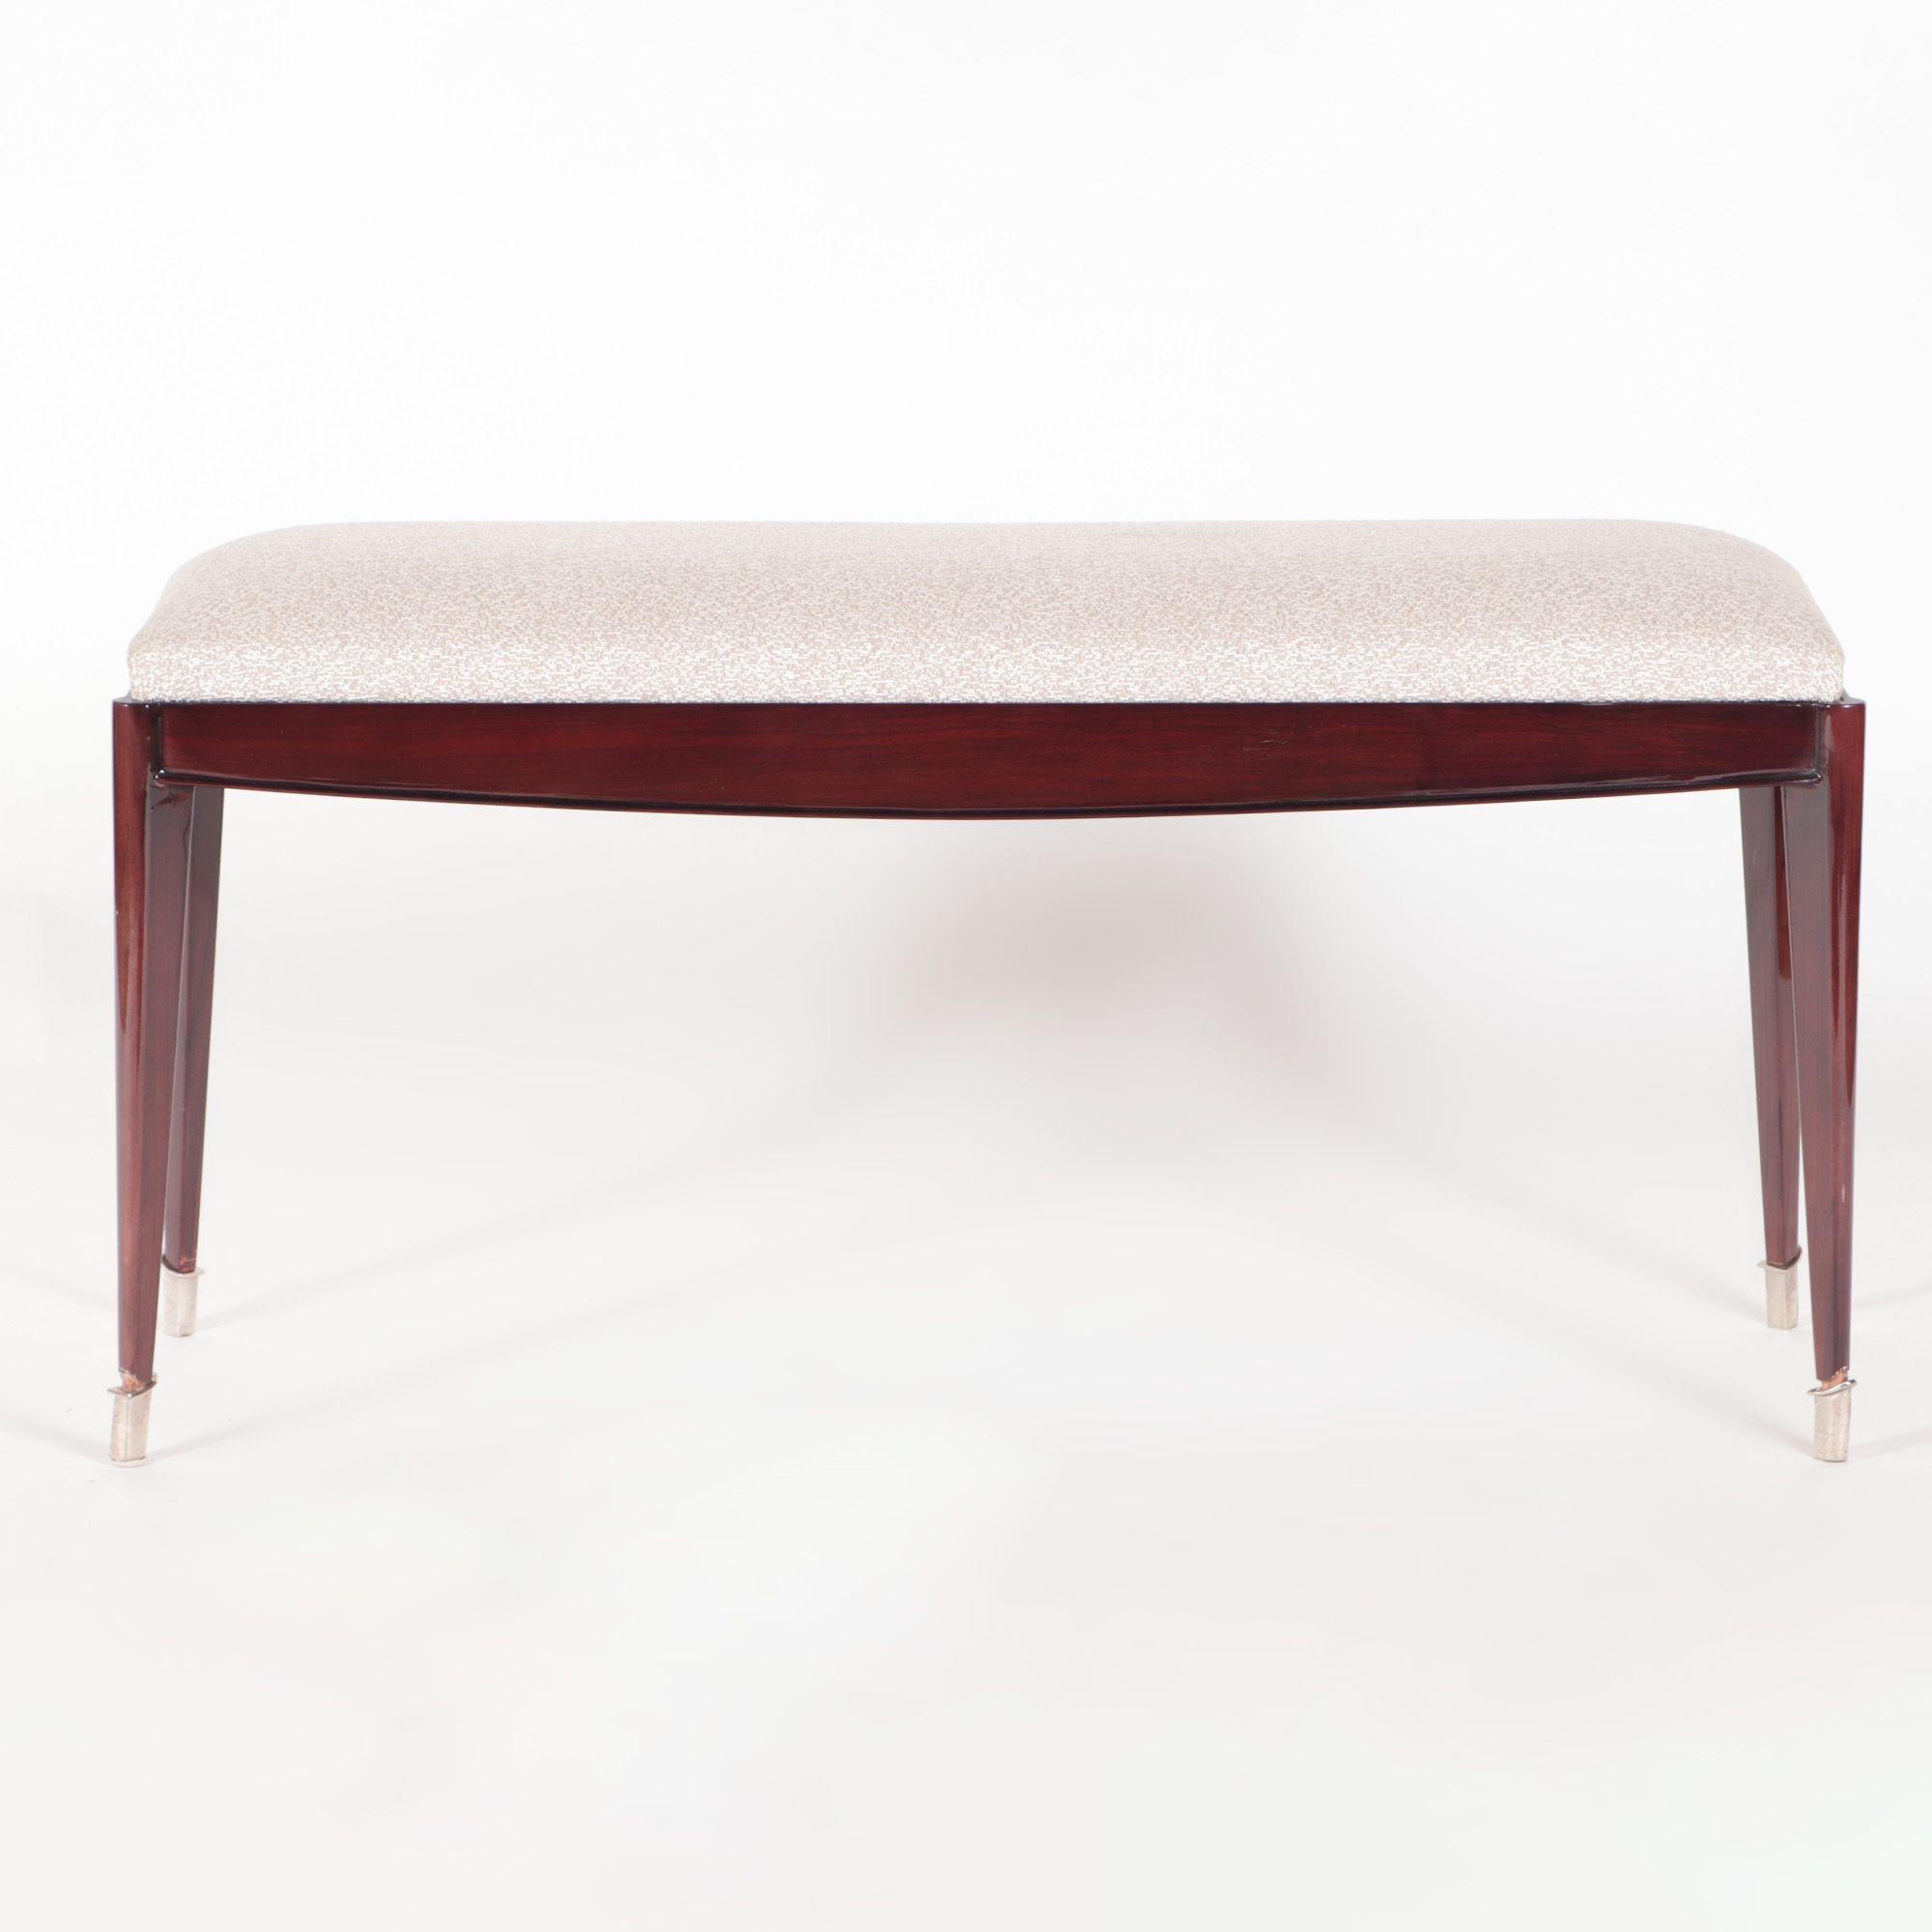 A very elegant French mahogany upholstered bench with silvered mounts and resting on four tapering legs, circa 1930.